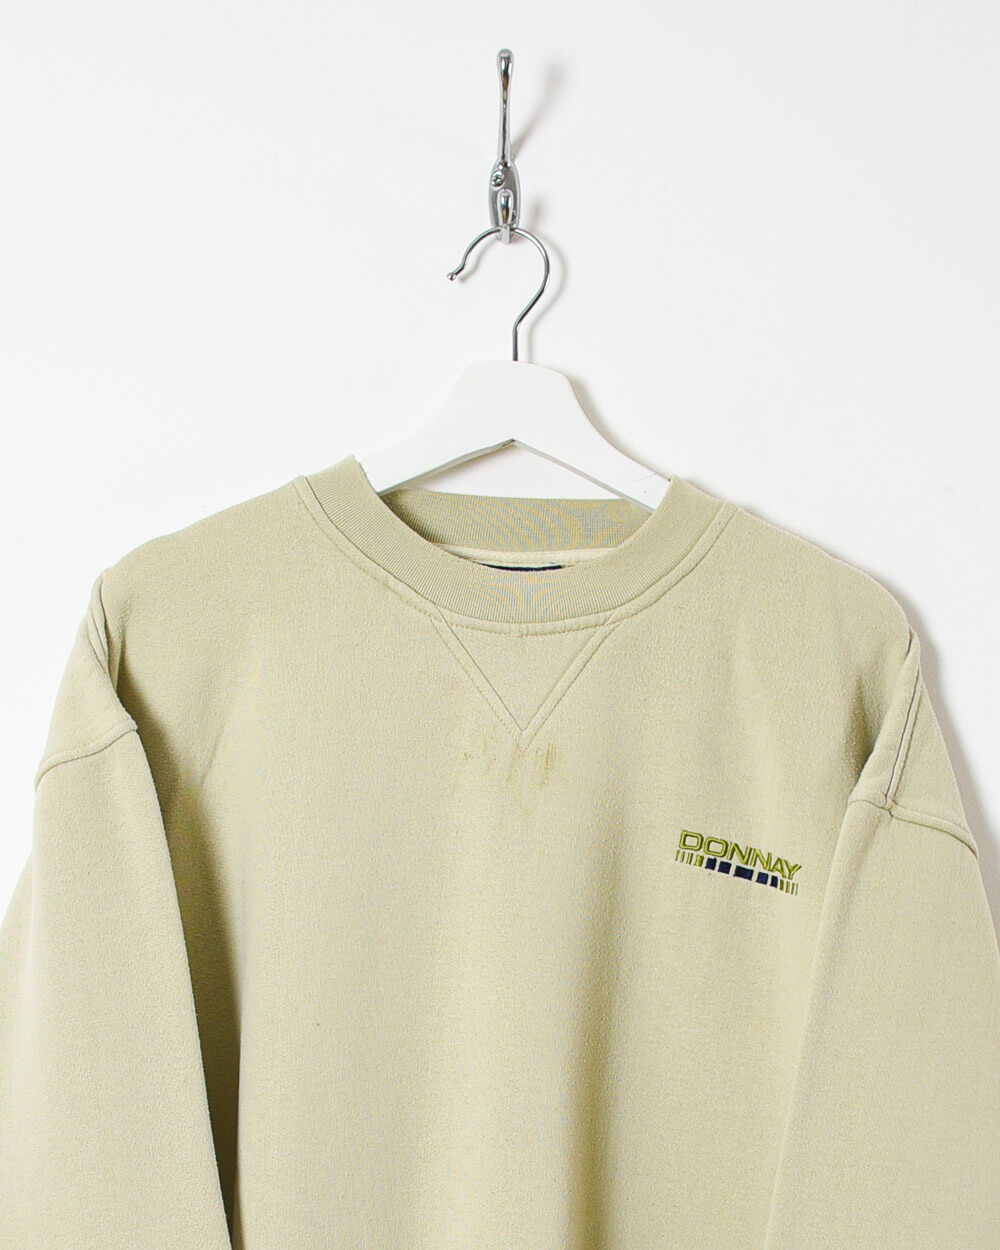 Donnay Sweatshirt - Large - Domno Vintage 90s, 80s, 00s Retro and Vintage Clothing 